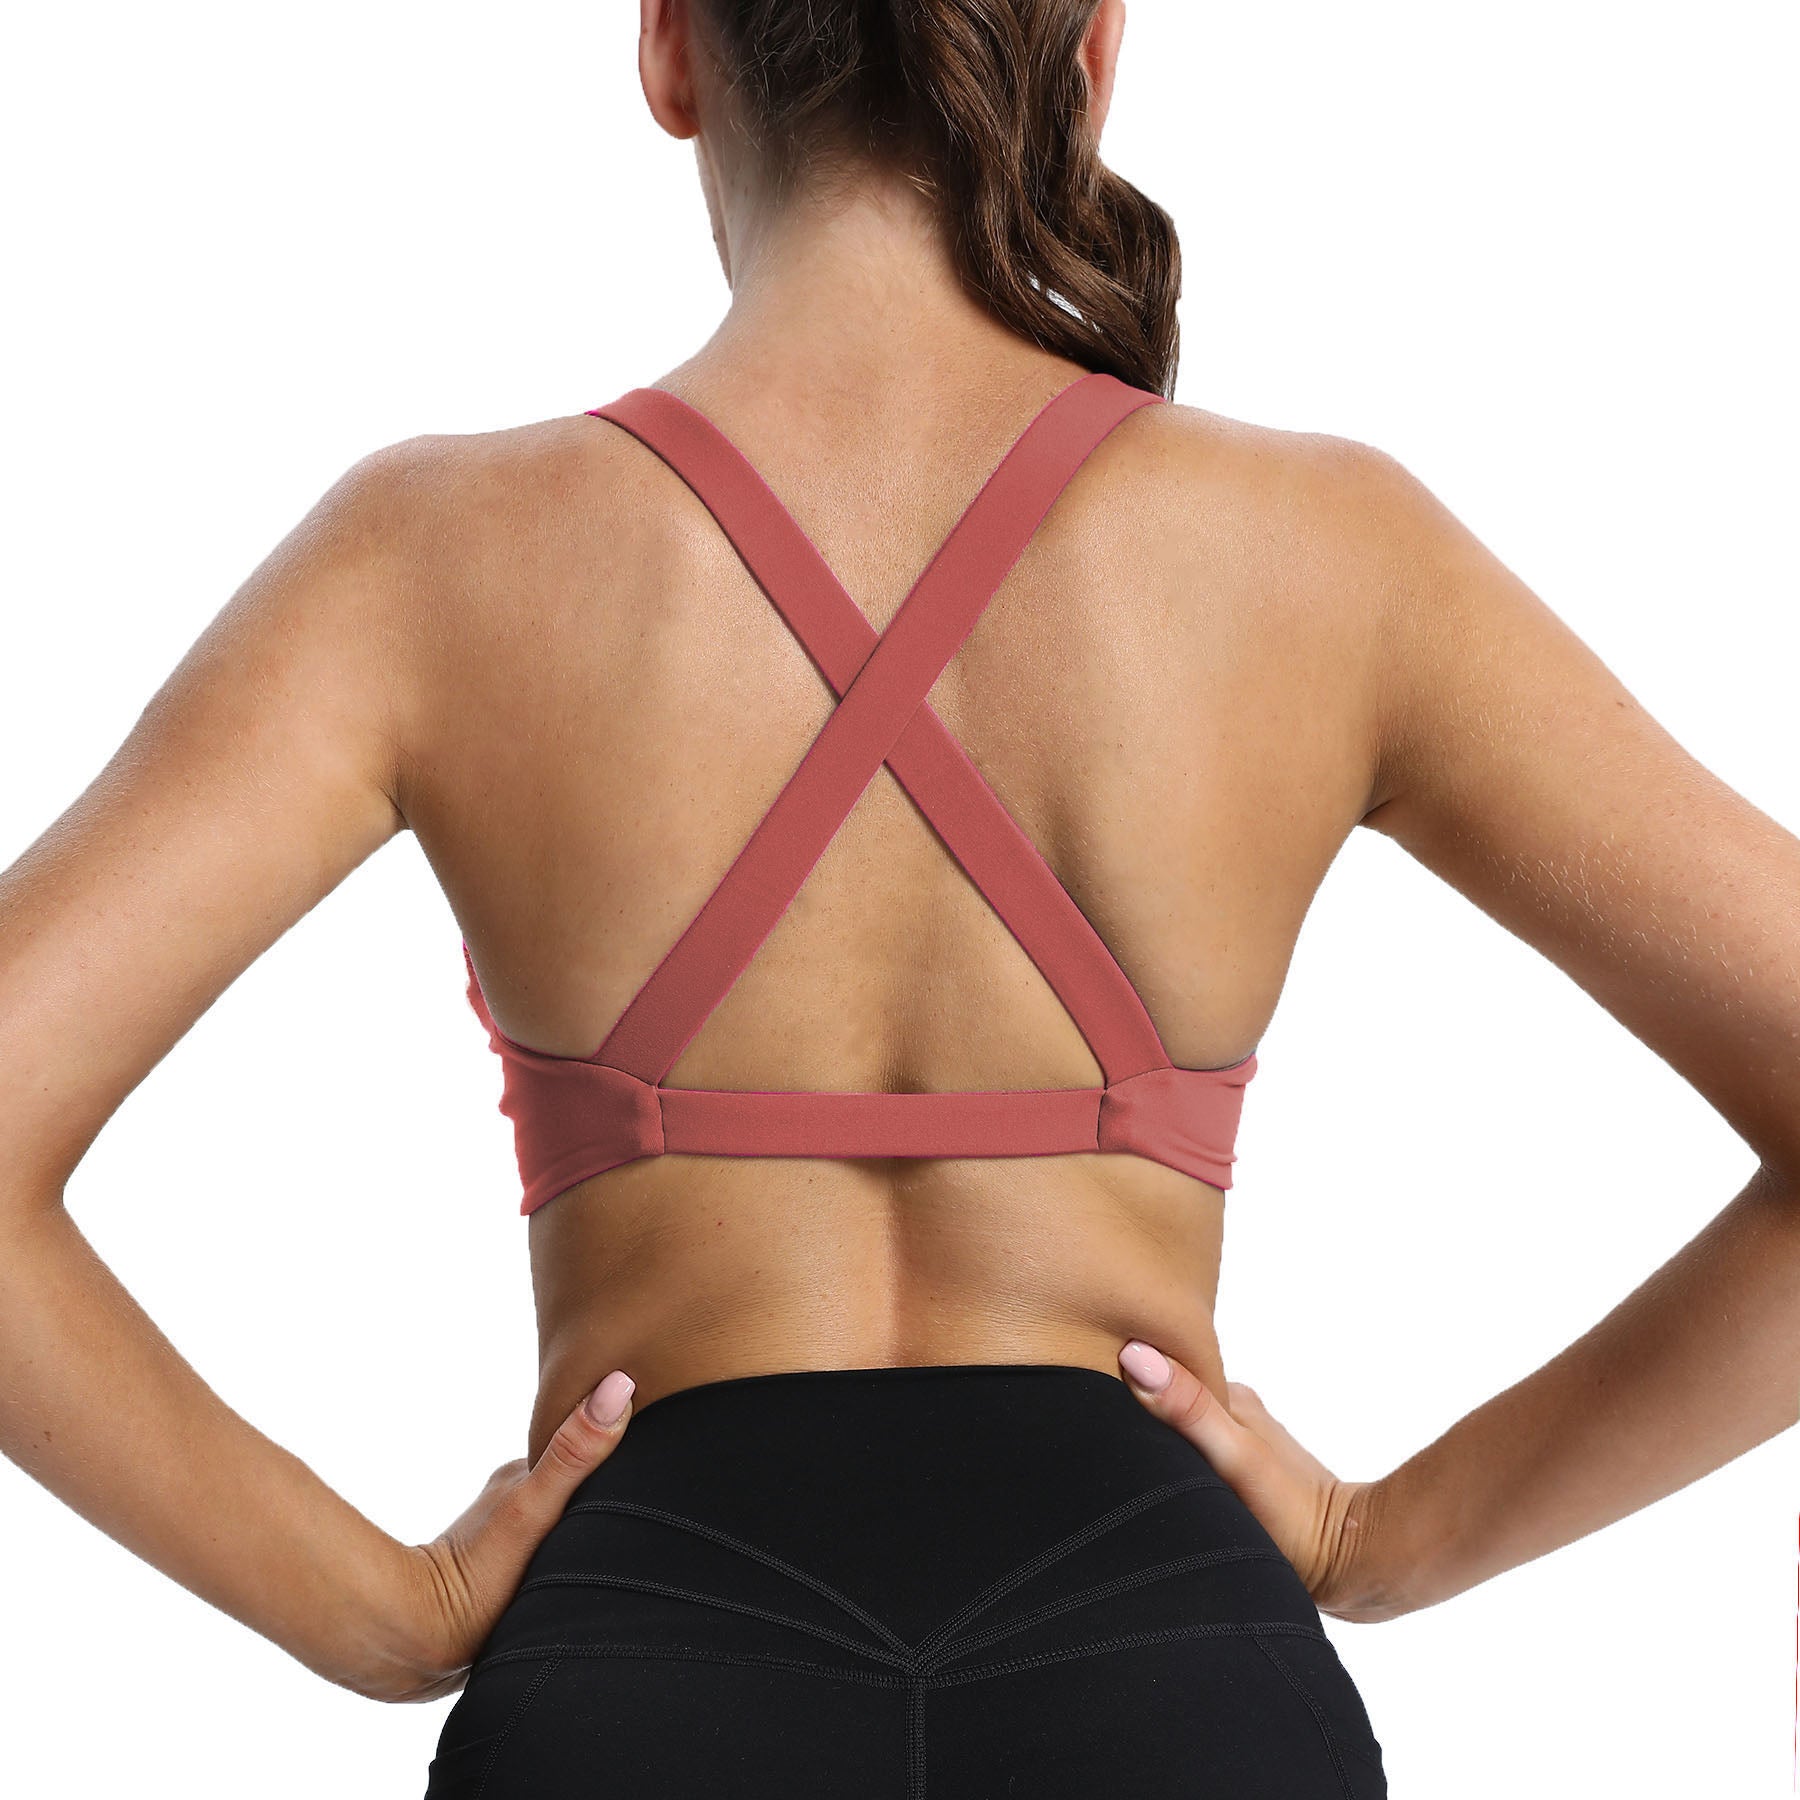 love this sports bra!! @AOXJOX #aoxjox #sportswear #active